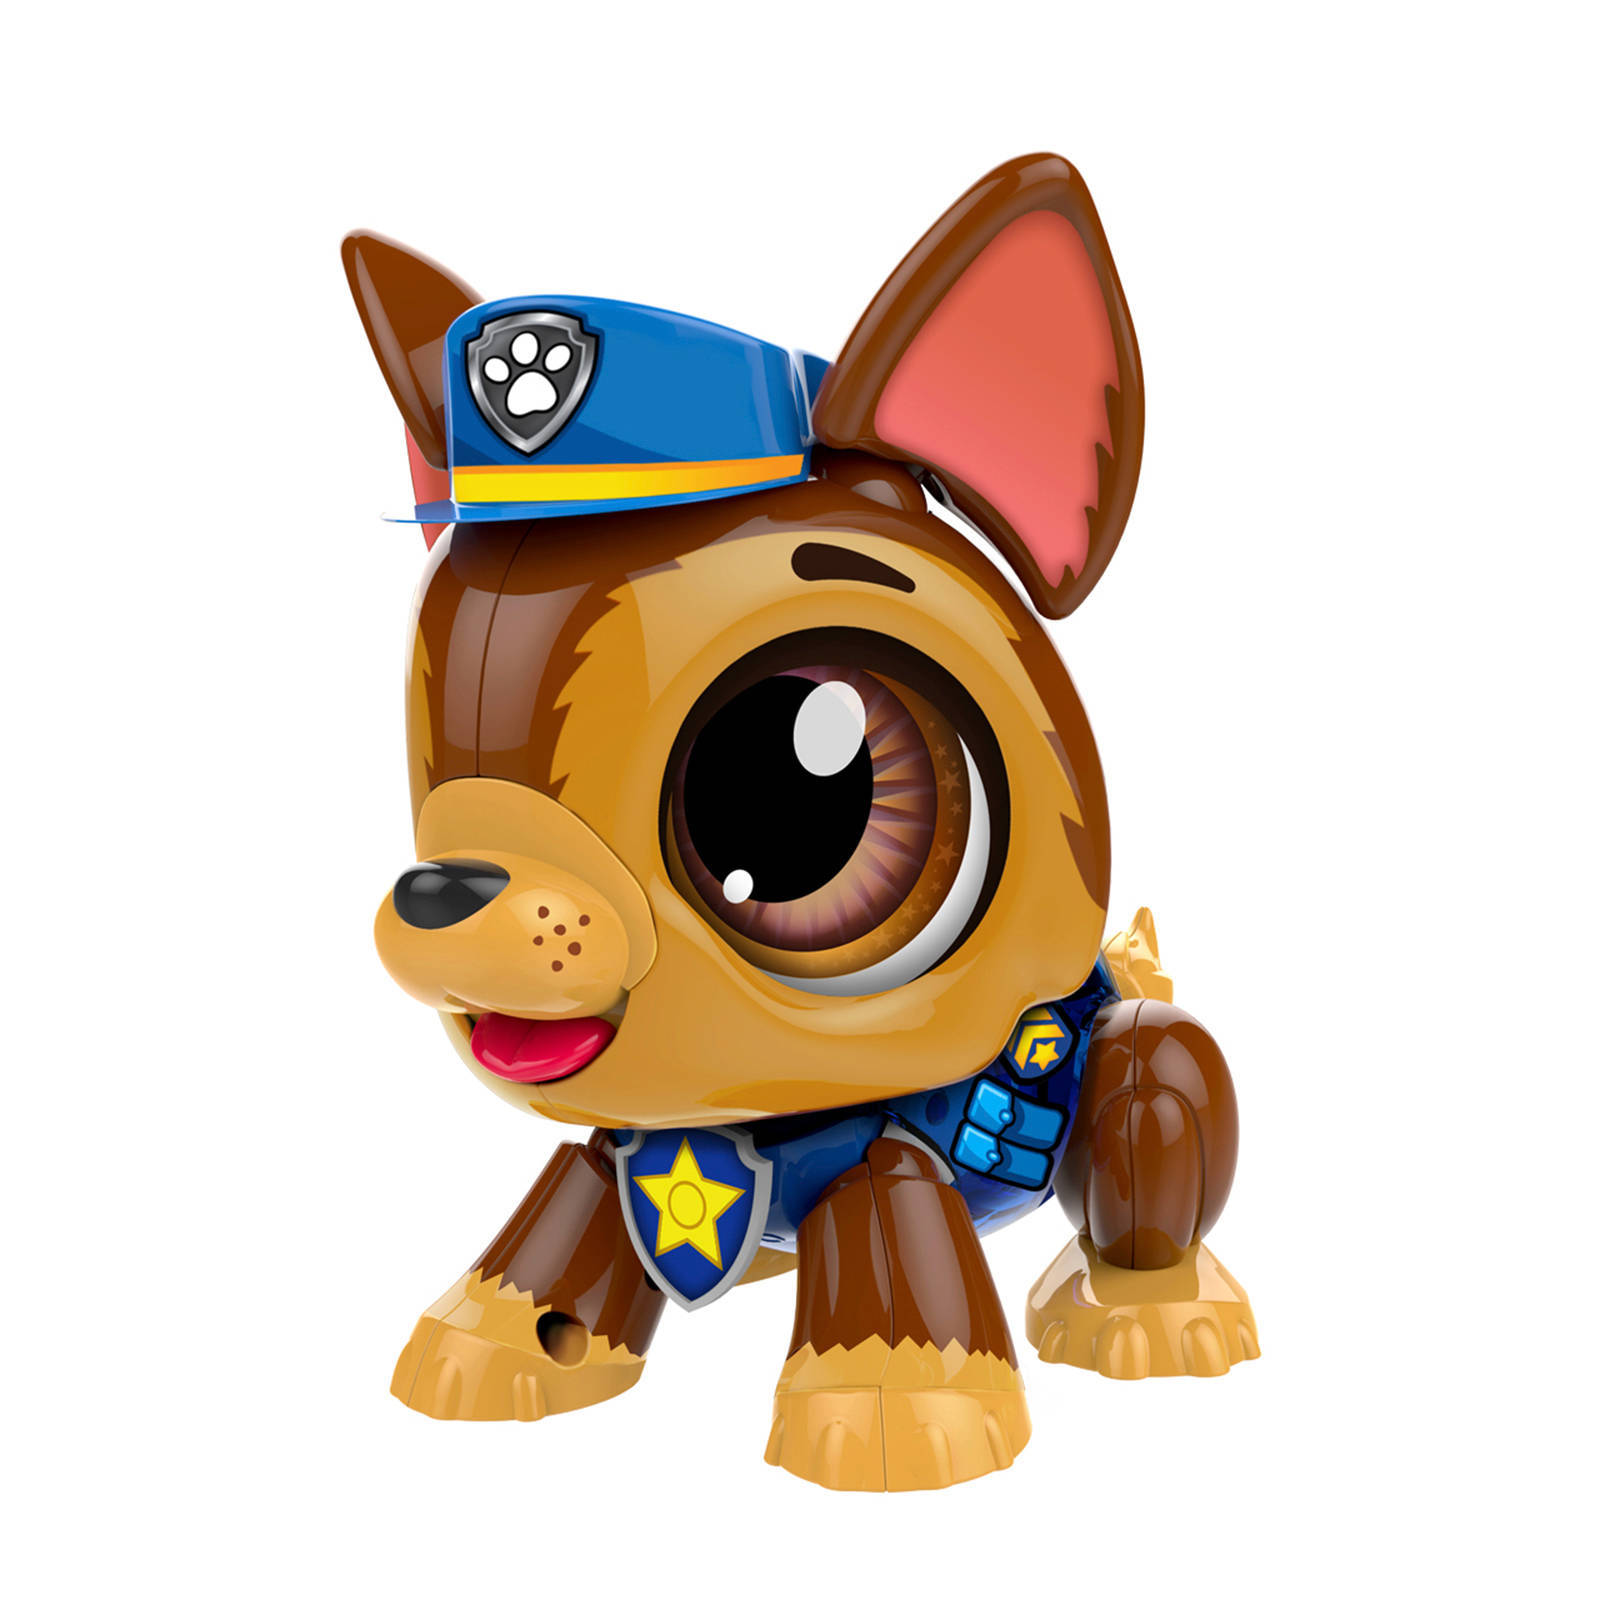 Gear2Play Build a Bot Paw Patrol robot Chase online kopen